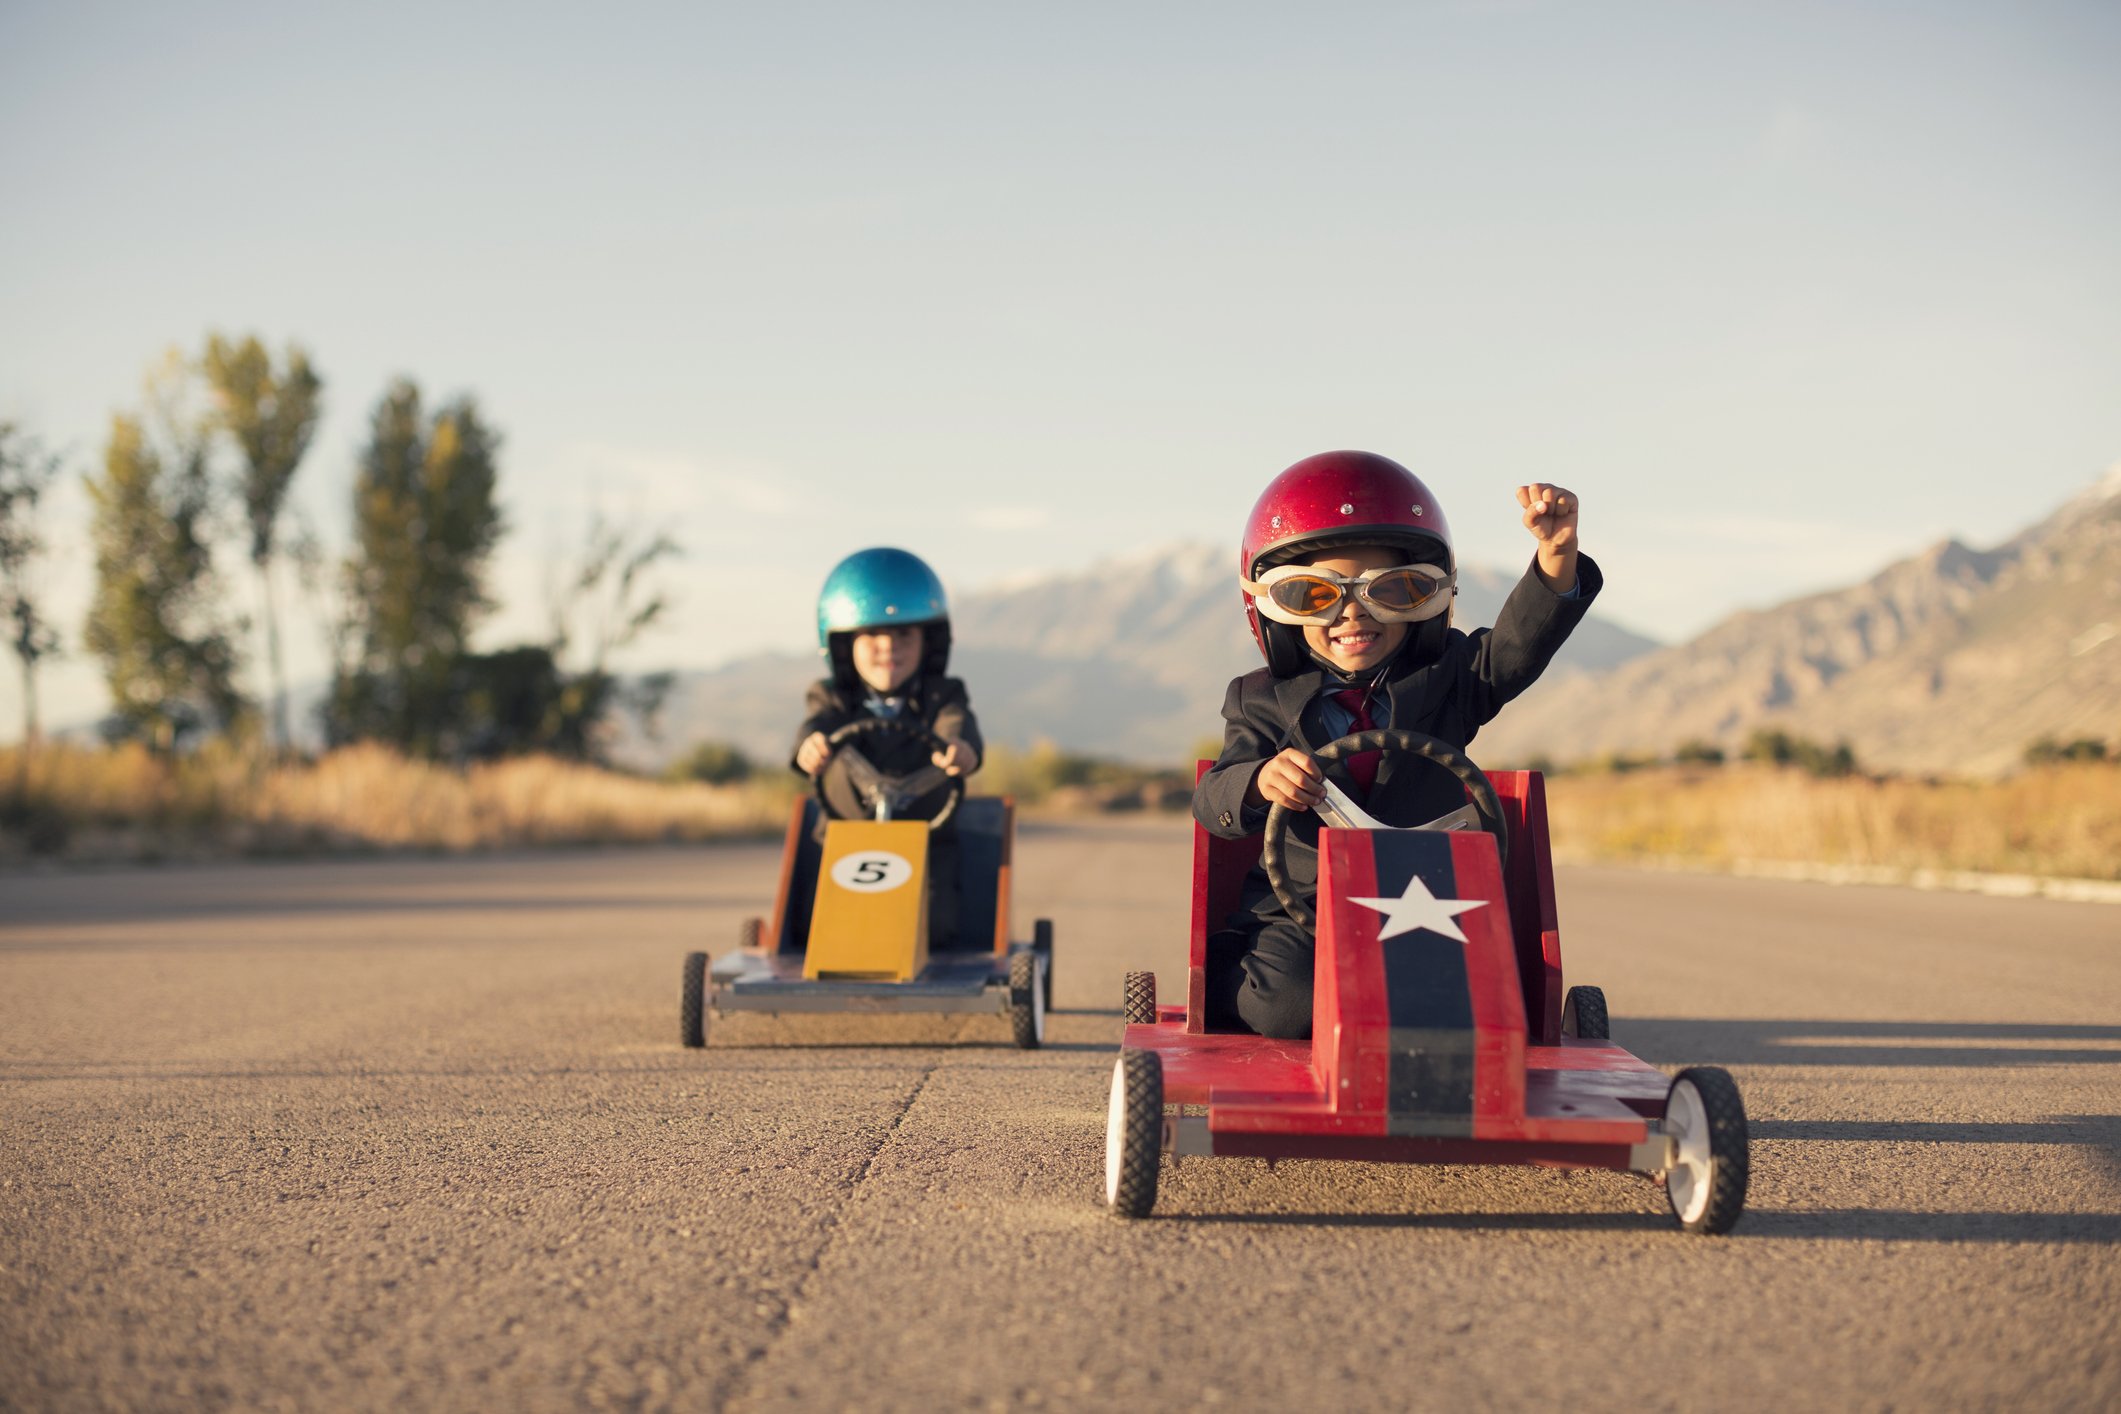 A young boy dressed as a businessman raises his arm in success as his homemade box car is in first place. Both boys are wearing helmets and goggles.